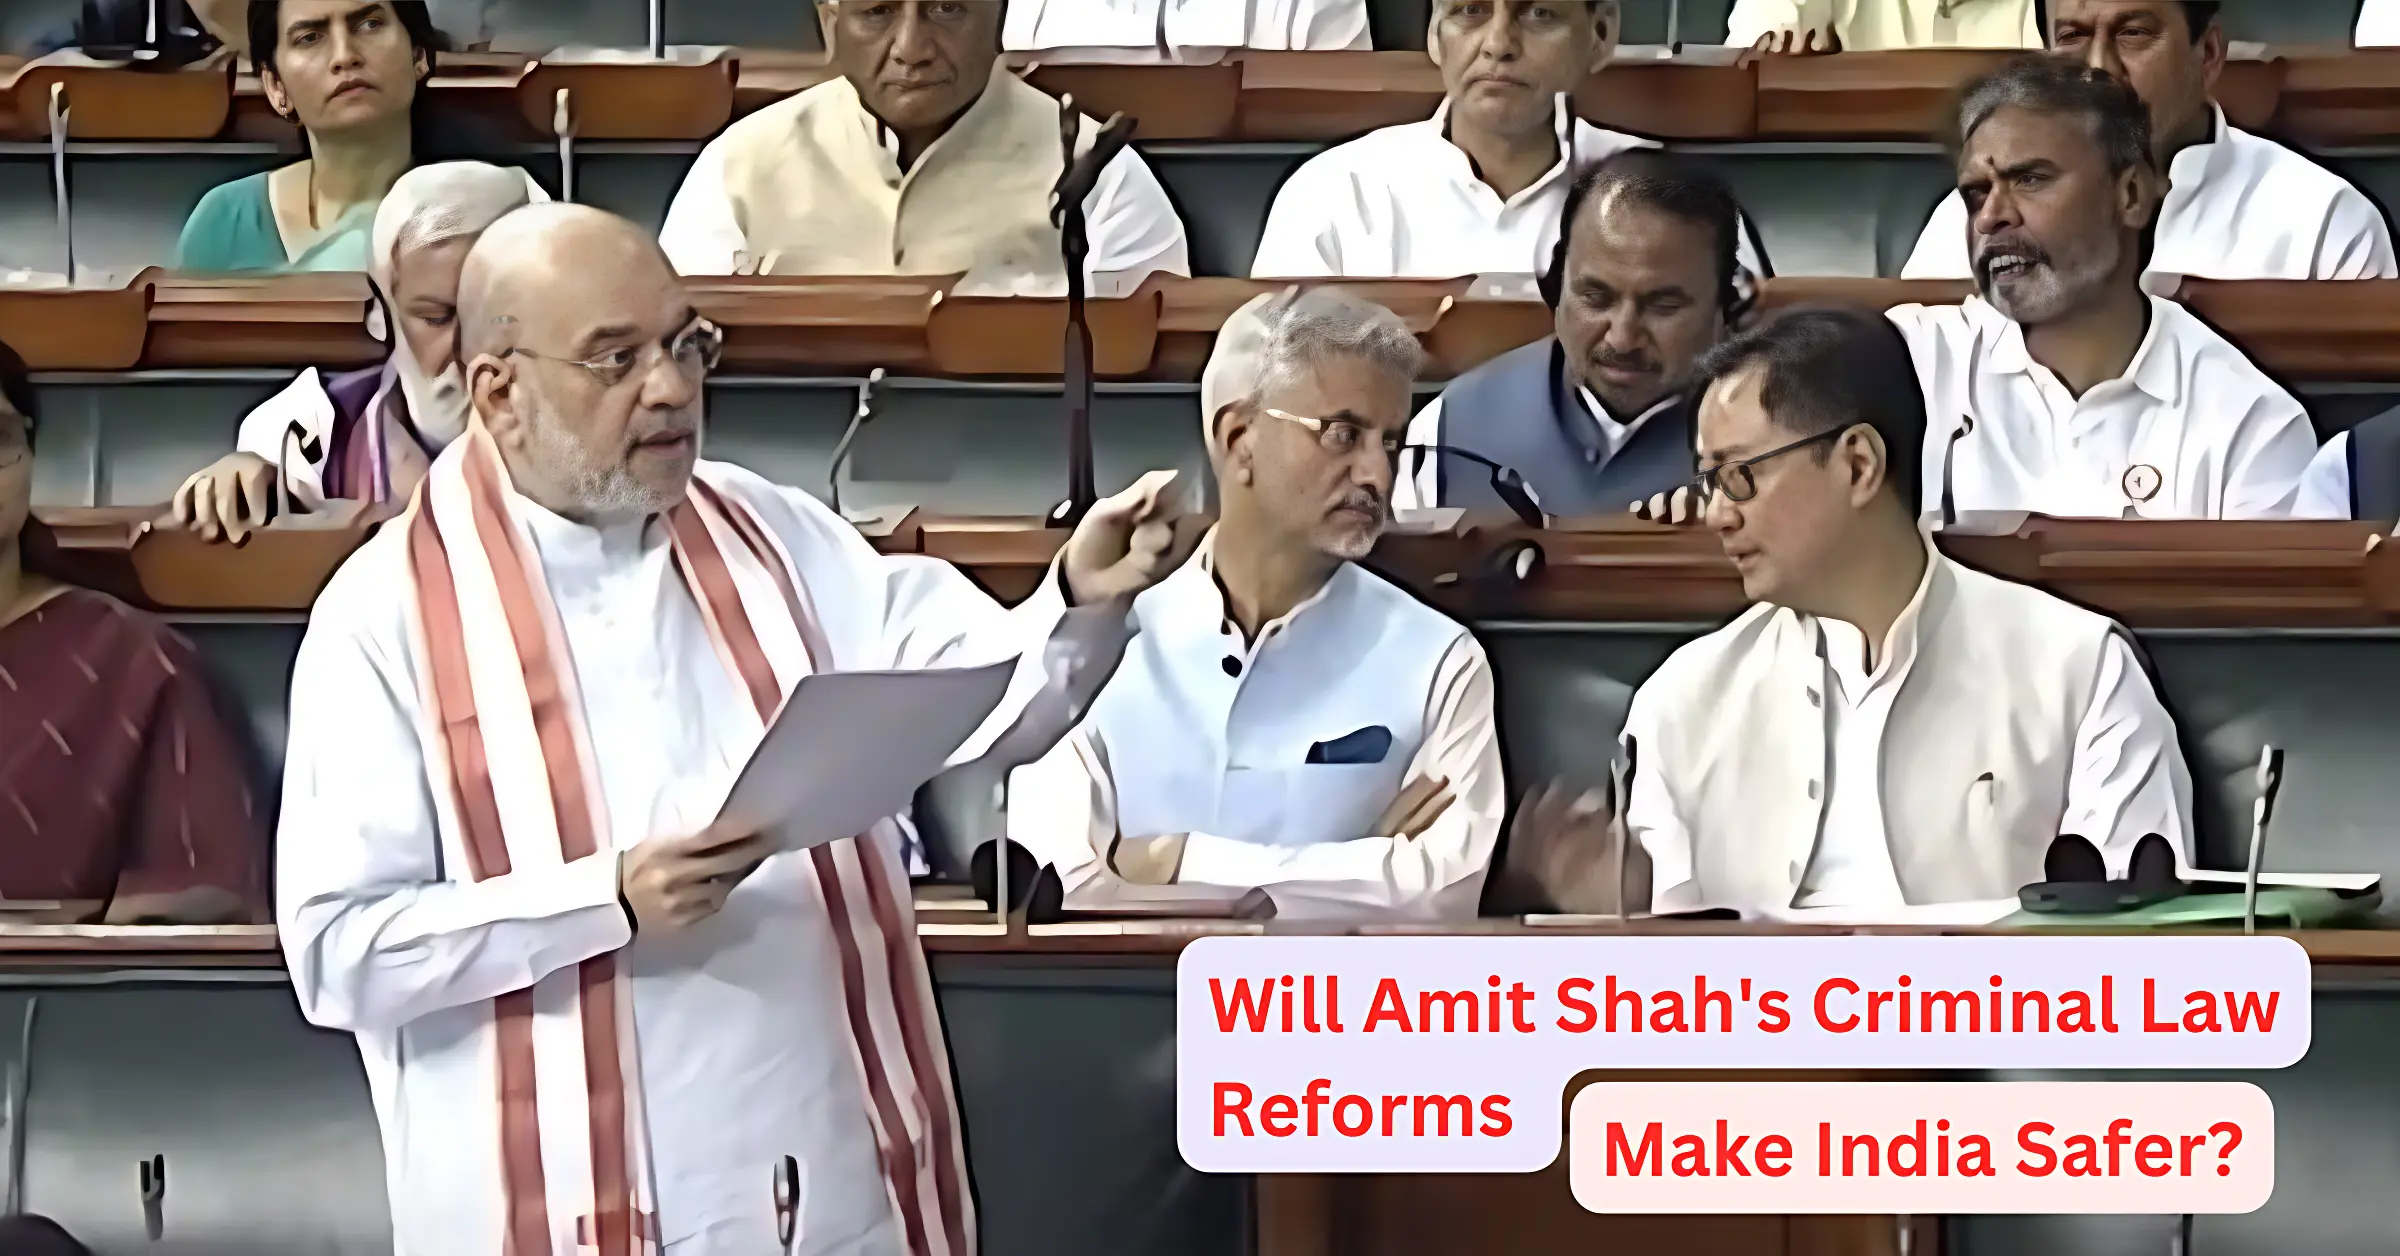 From IPC to BNS: Amit Shah's Ambitious Criminal Law Reforms Re-Ignite Debate INFORMEIA